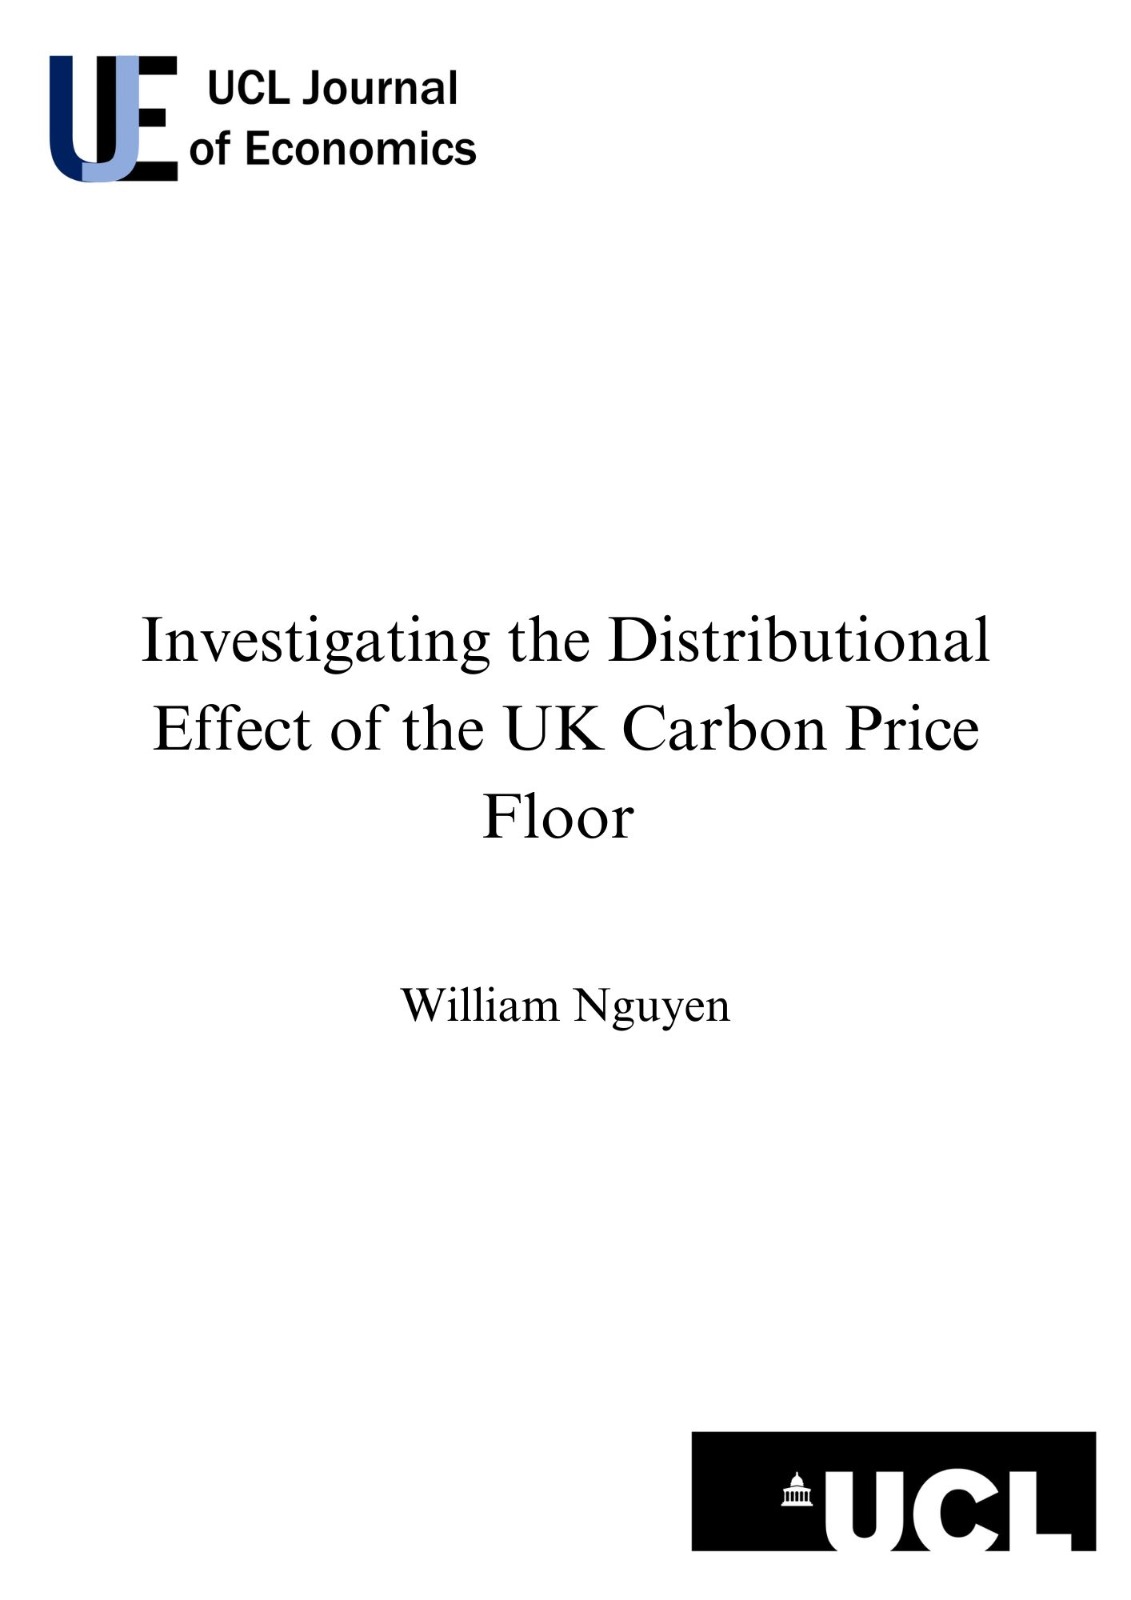 Investigating the Distributional Effect of the UK Carbon Price Floor